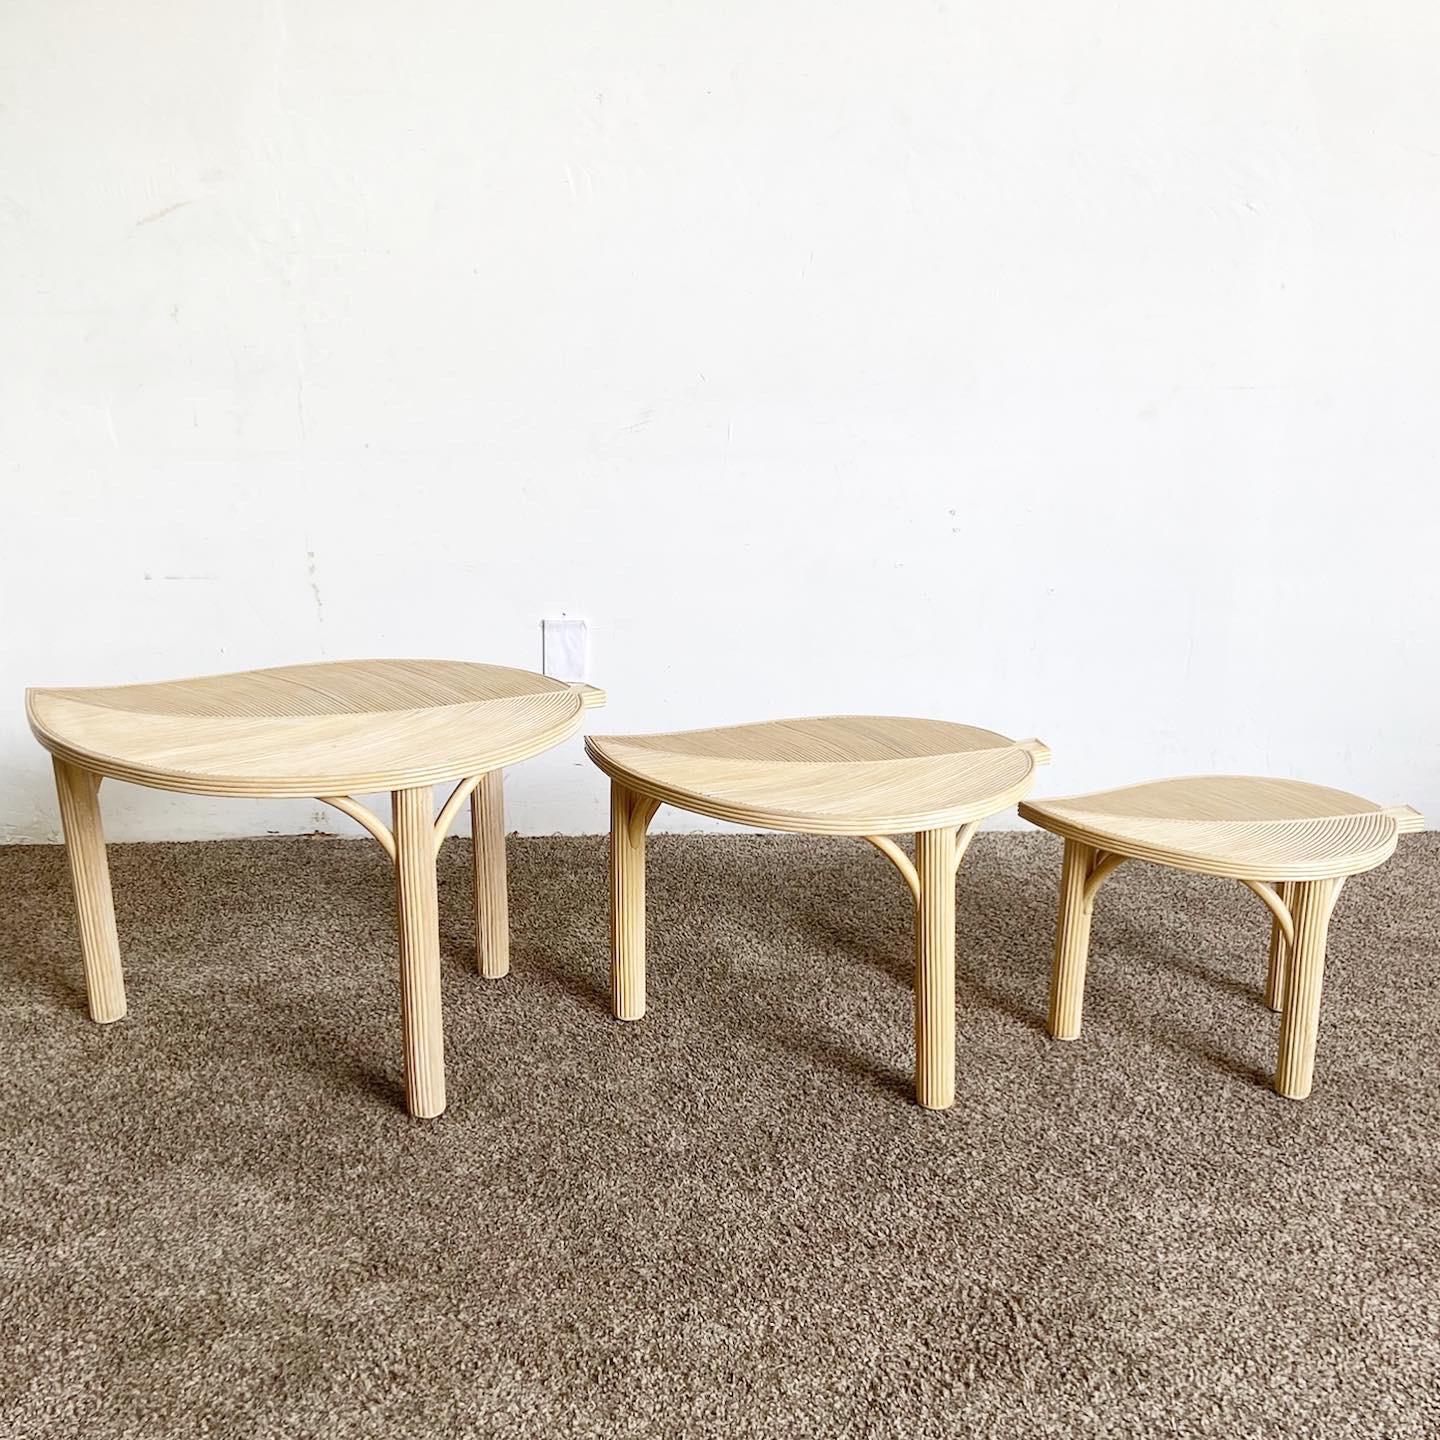 Boho Chic Pencil Reed Leaf Nesting Tables - Set of 3 In Good Condition For Sale In Delray Beach, FL